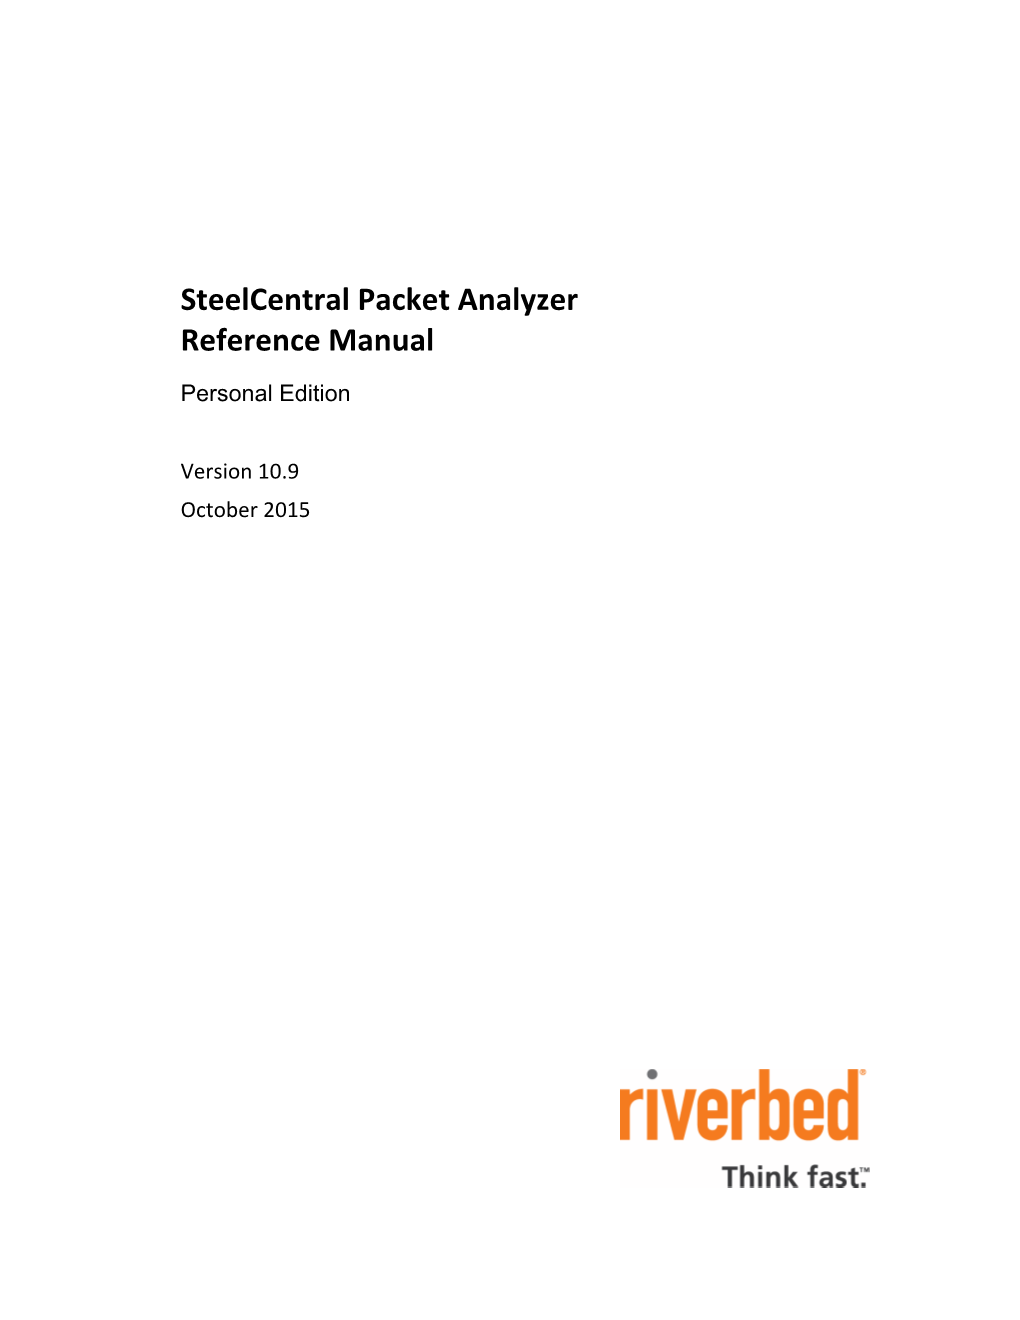 Steelcentral Packet Analyzer Reference Manual, Personal Edition